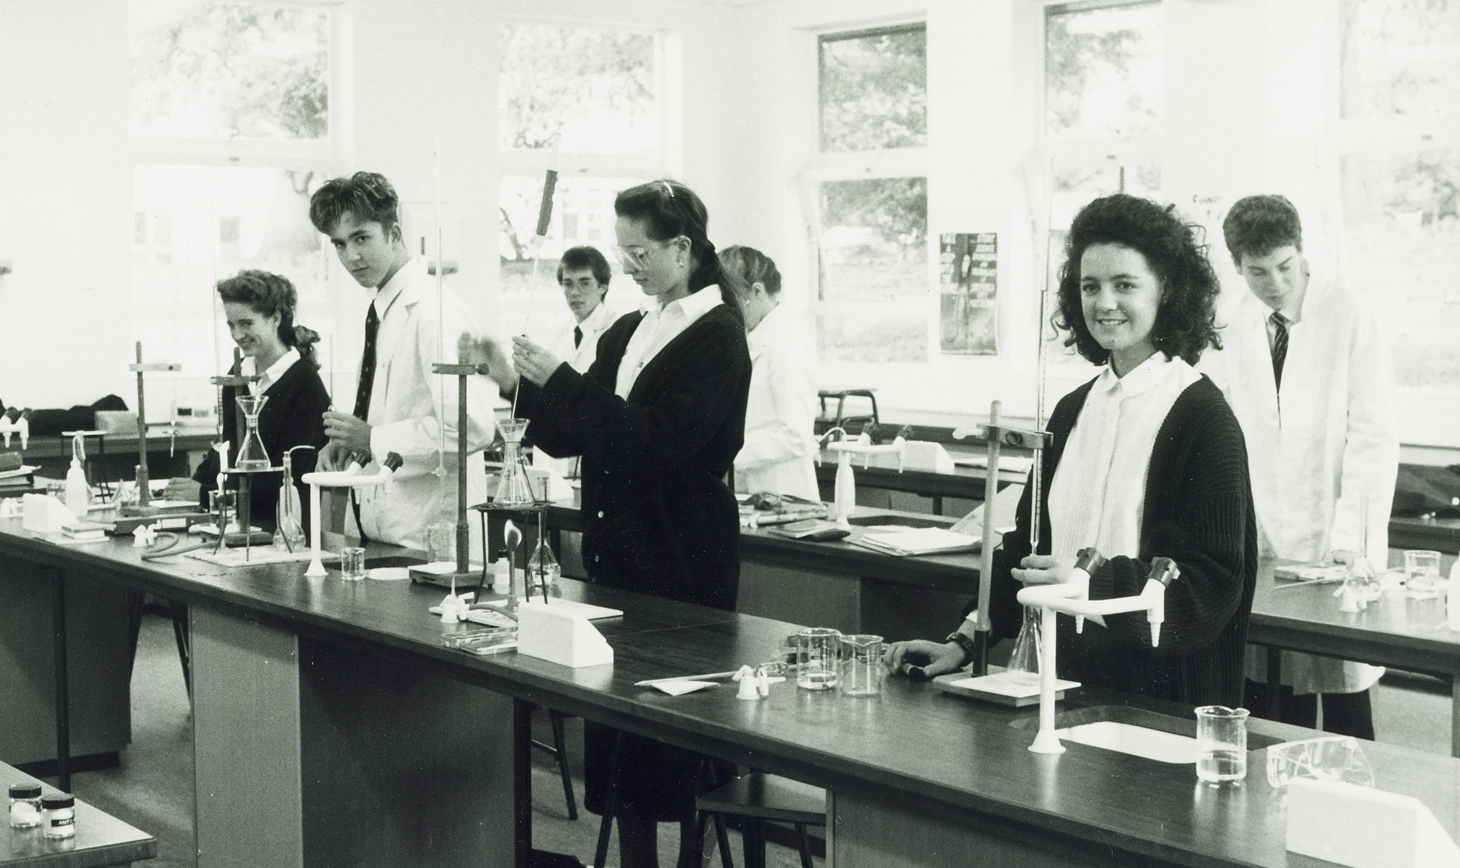 Who remembers the 'new' science block opening in 1989?